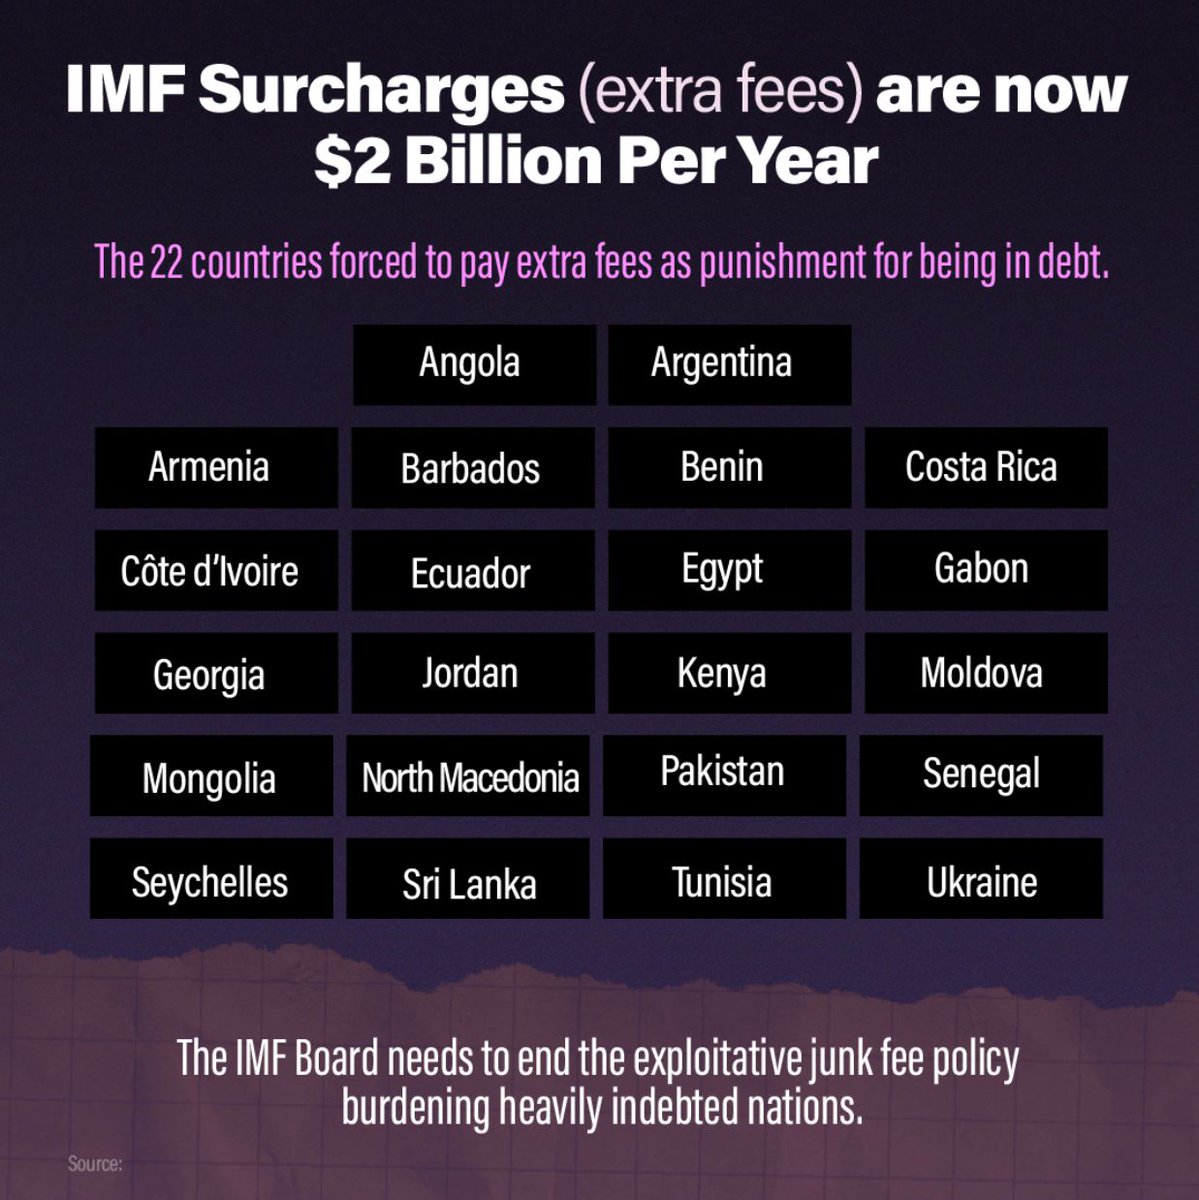 Today, over 540 CSOs jointly urged the @IMFNews Executive Board to abolish its surcharge policies, highlighting the detrimental impact on heavily indebted nations, especially amidst pressing global challenges. #StopIMFSurcharges Read :  bit.ly/3U9idNW